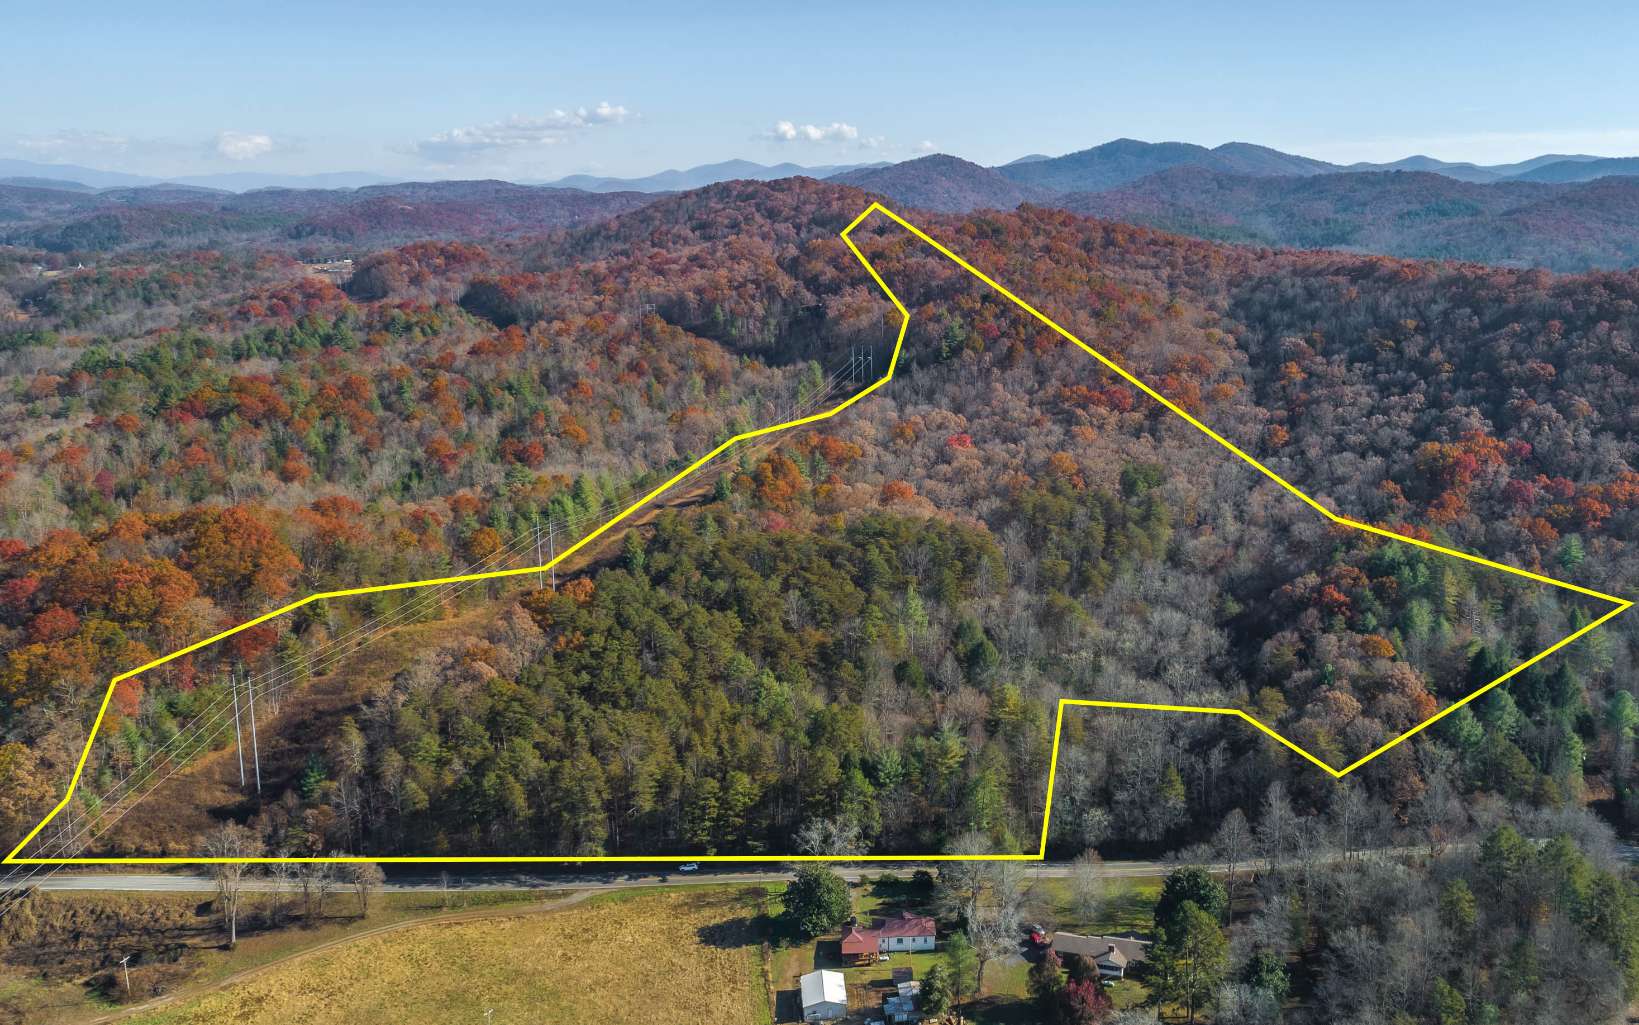 Beautiful Gently Rolling Acreage with Year Round Mountain and Pasture Views! Heavily Wooded with Towering Hardwoods and Paved Road Frontage for Easy Access! Branch Through Property and Ridge Line Frontage. Great Convenient Location Just Minutes From Downtown Blue Ridge and Lake Blue Ridge! And Within Walking Distance of USFS! Would Make Great Private Retreat or Beautiful Development!